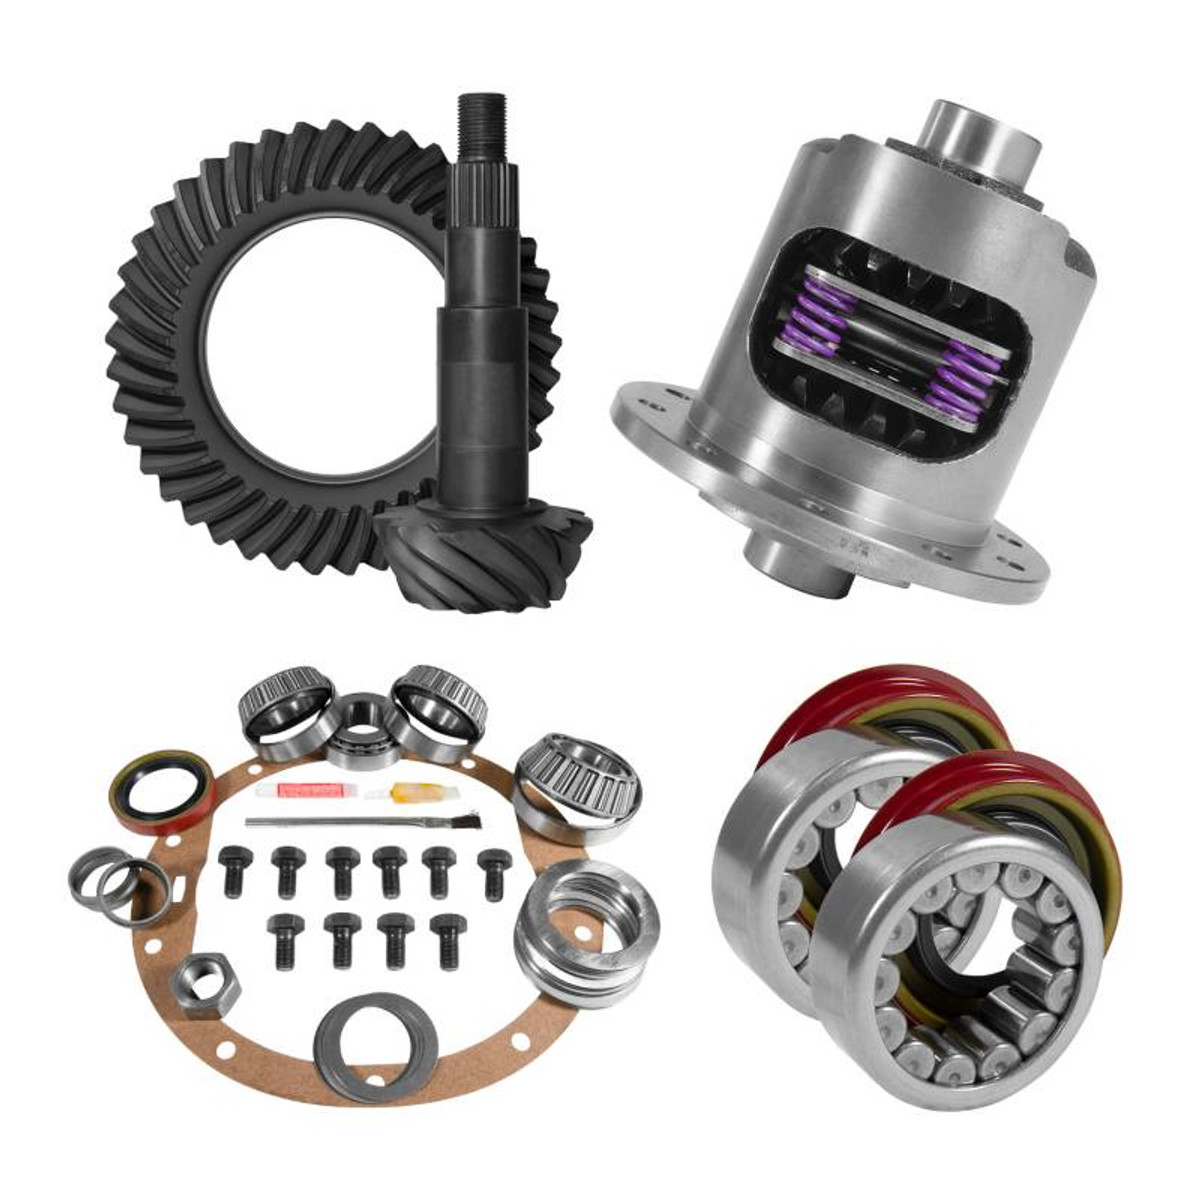 8.5 inch GM 4.88 Rear Ring and Pinion Install Kit 30 Spline Positraction Axle Bearings and Seals YGK2005